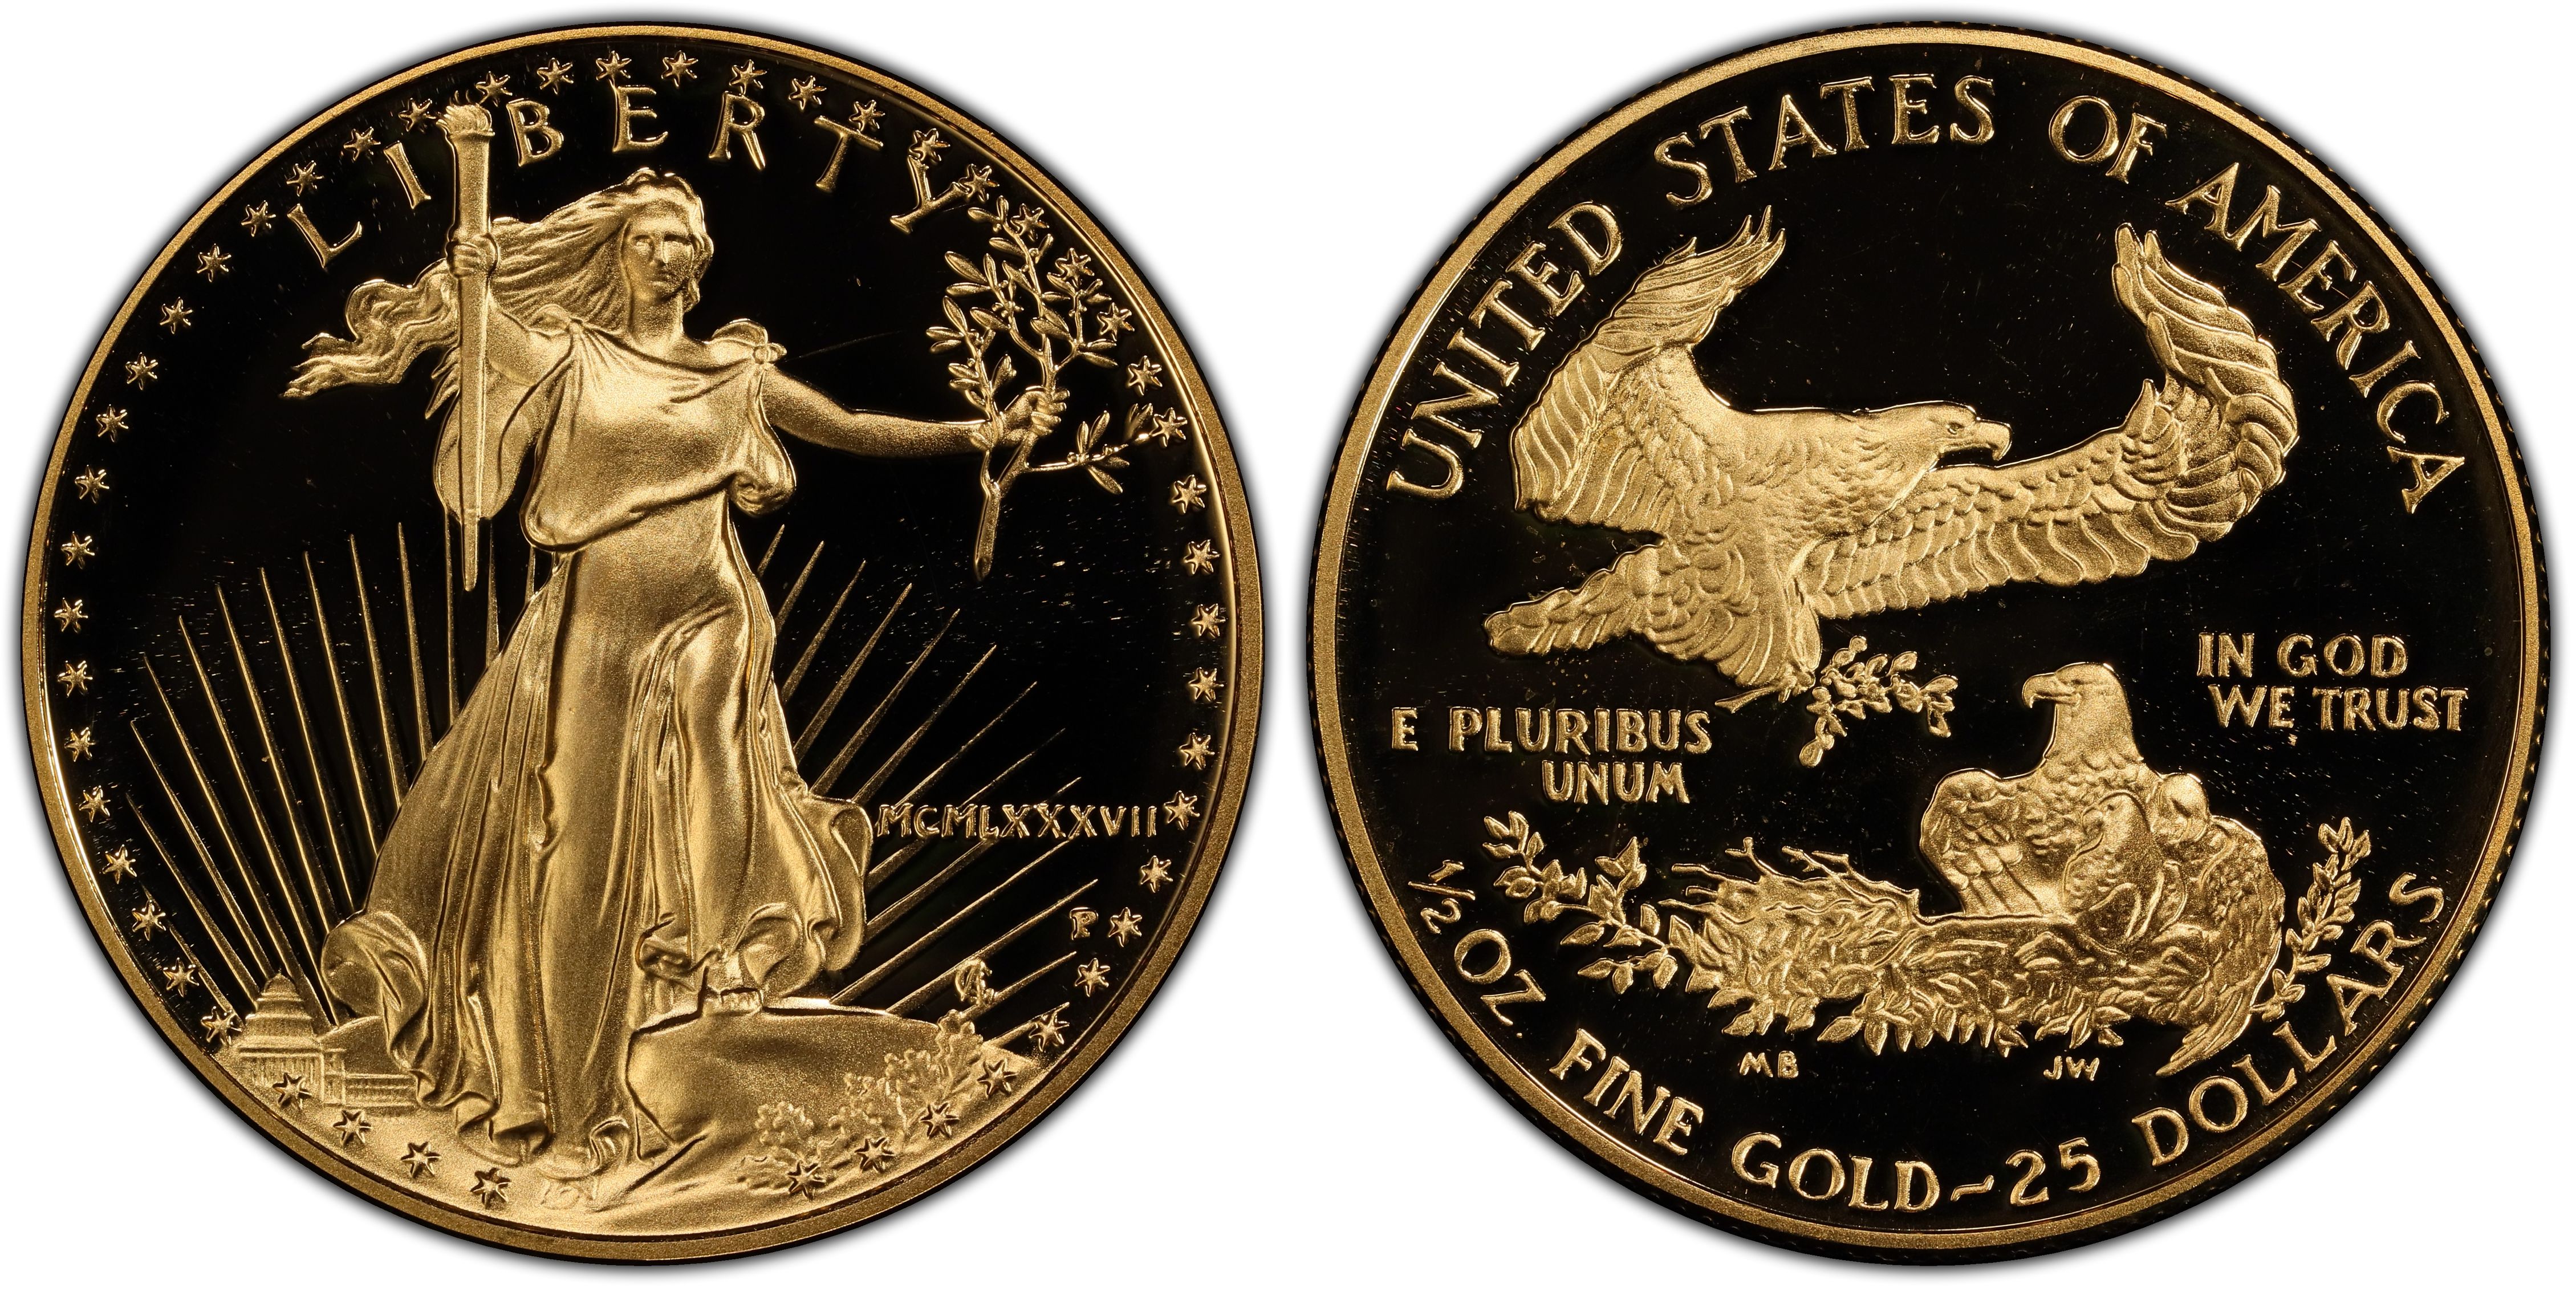 1987-P $25 Gold Eagle, DCAM (Proof) Gold Eagles - PCGS CoinFacts